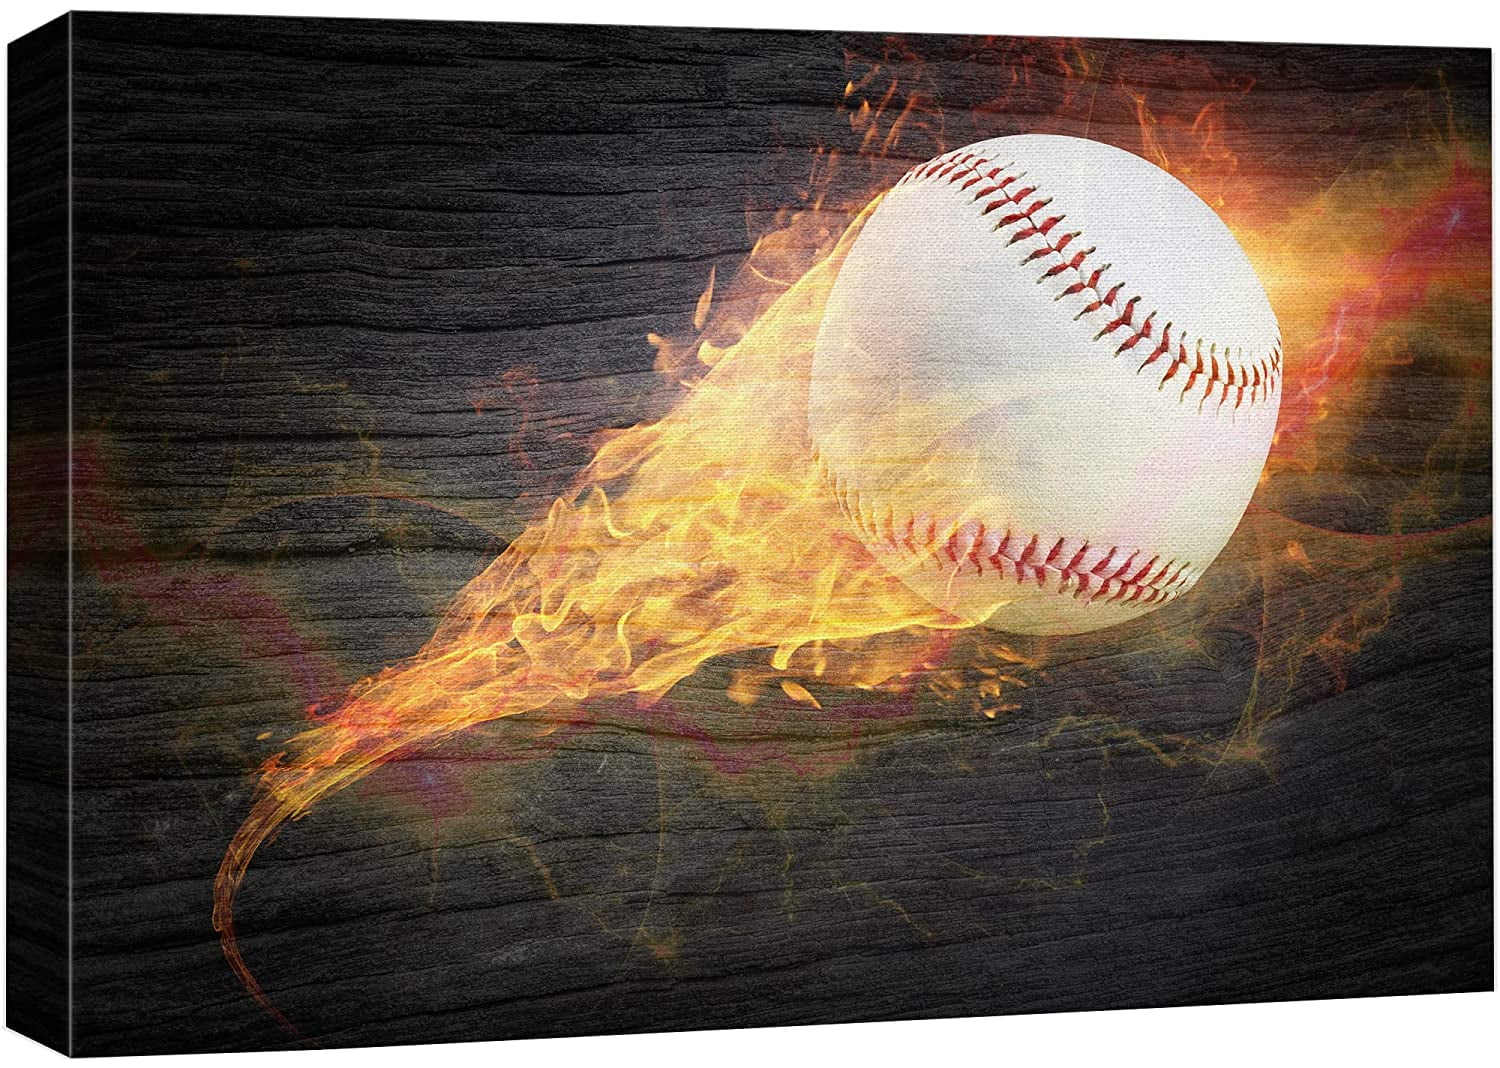 wall26 Canvas Print Wall Art Wood Panel Effect Blazing Fire Spark Baseball  Boys Room Decor Sports Fitness Photography Realism Decorative Scenic  Multicolor for Living Room, Bedroom, Office - 16"x 